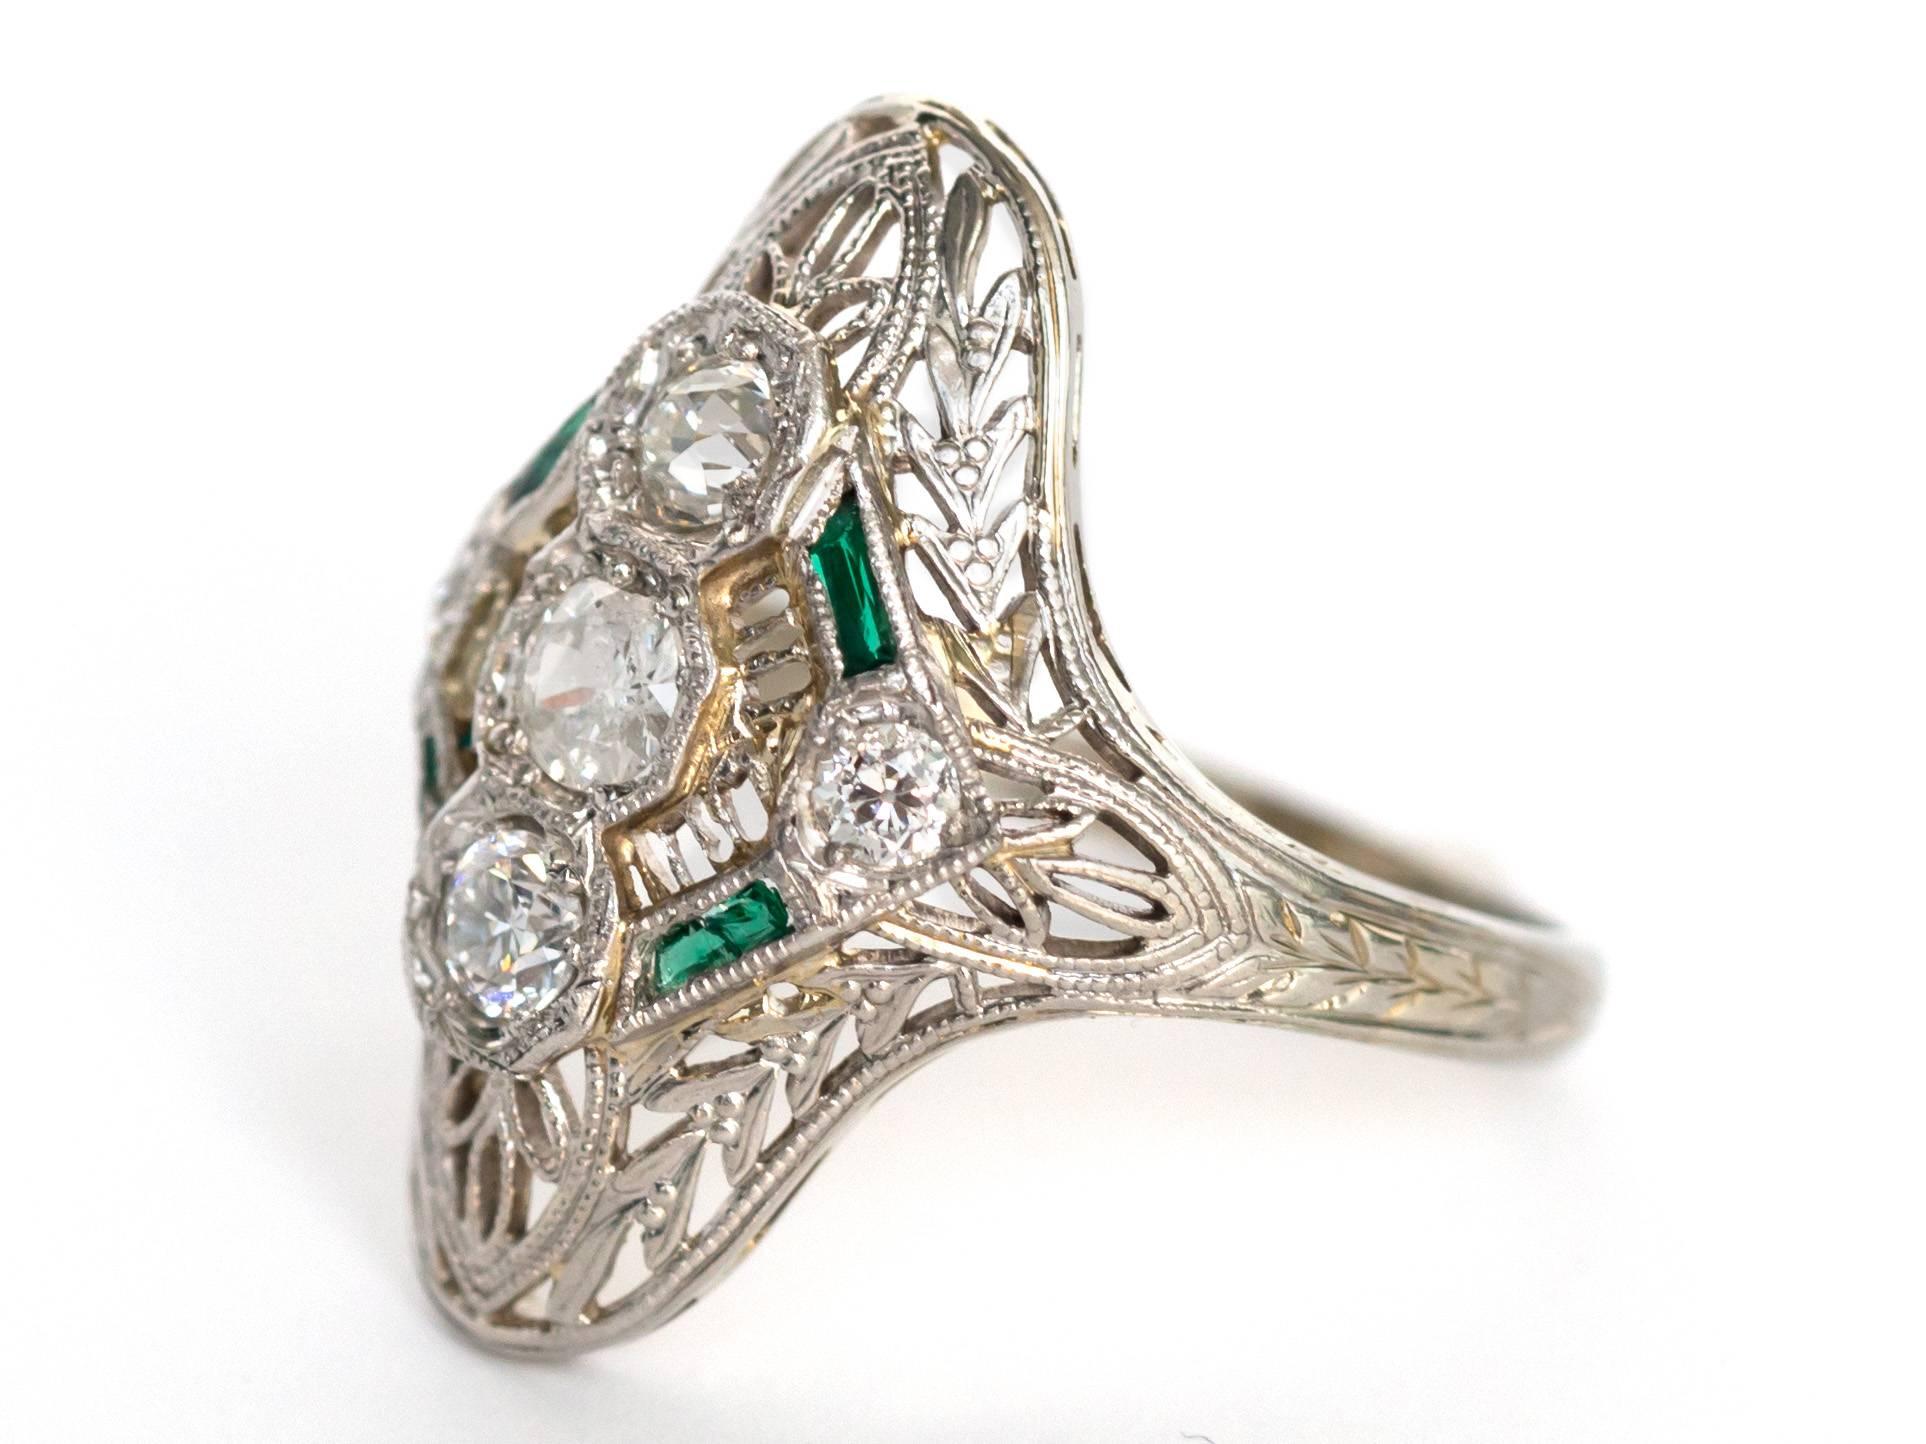 Item Details: 
Ring Size: 5.5
Metal Type: Platinum
Weight: 3.6 grams

Diamond Details
Shape: Old European Diamond
Carat Weight: .50 Carat, total weight 
Color: F
Clarity: VS

Color Stone Details: 
Type: Natural Emerald
Shape: French Cut
Carat Weigh: